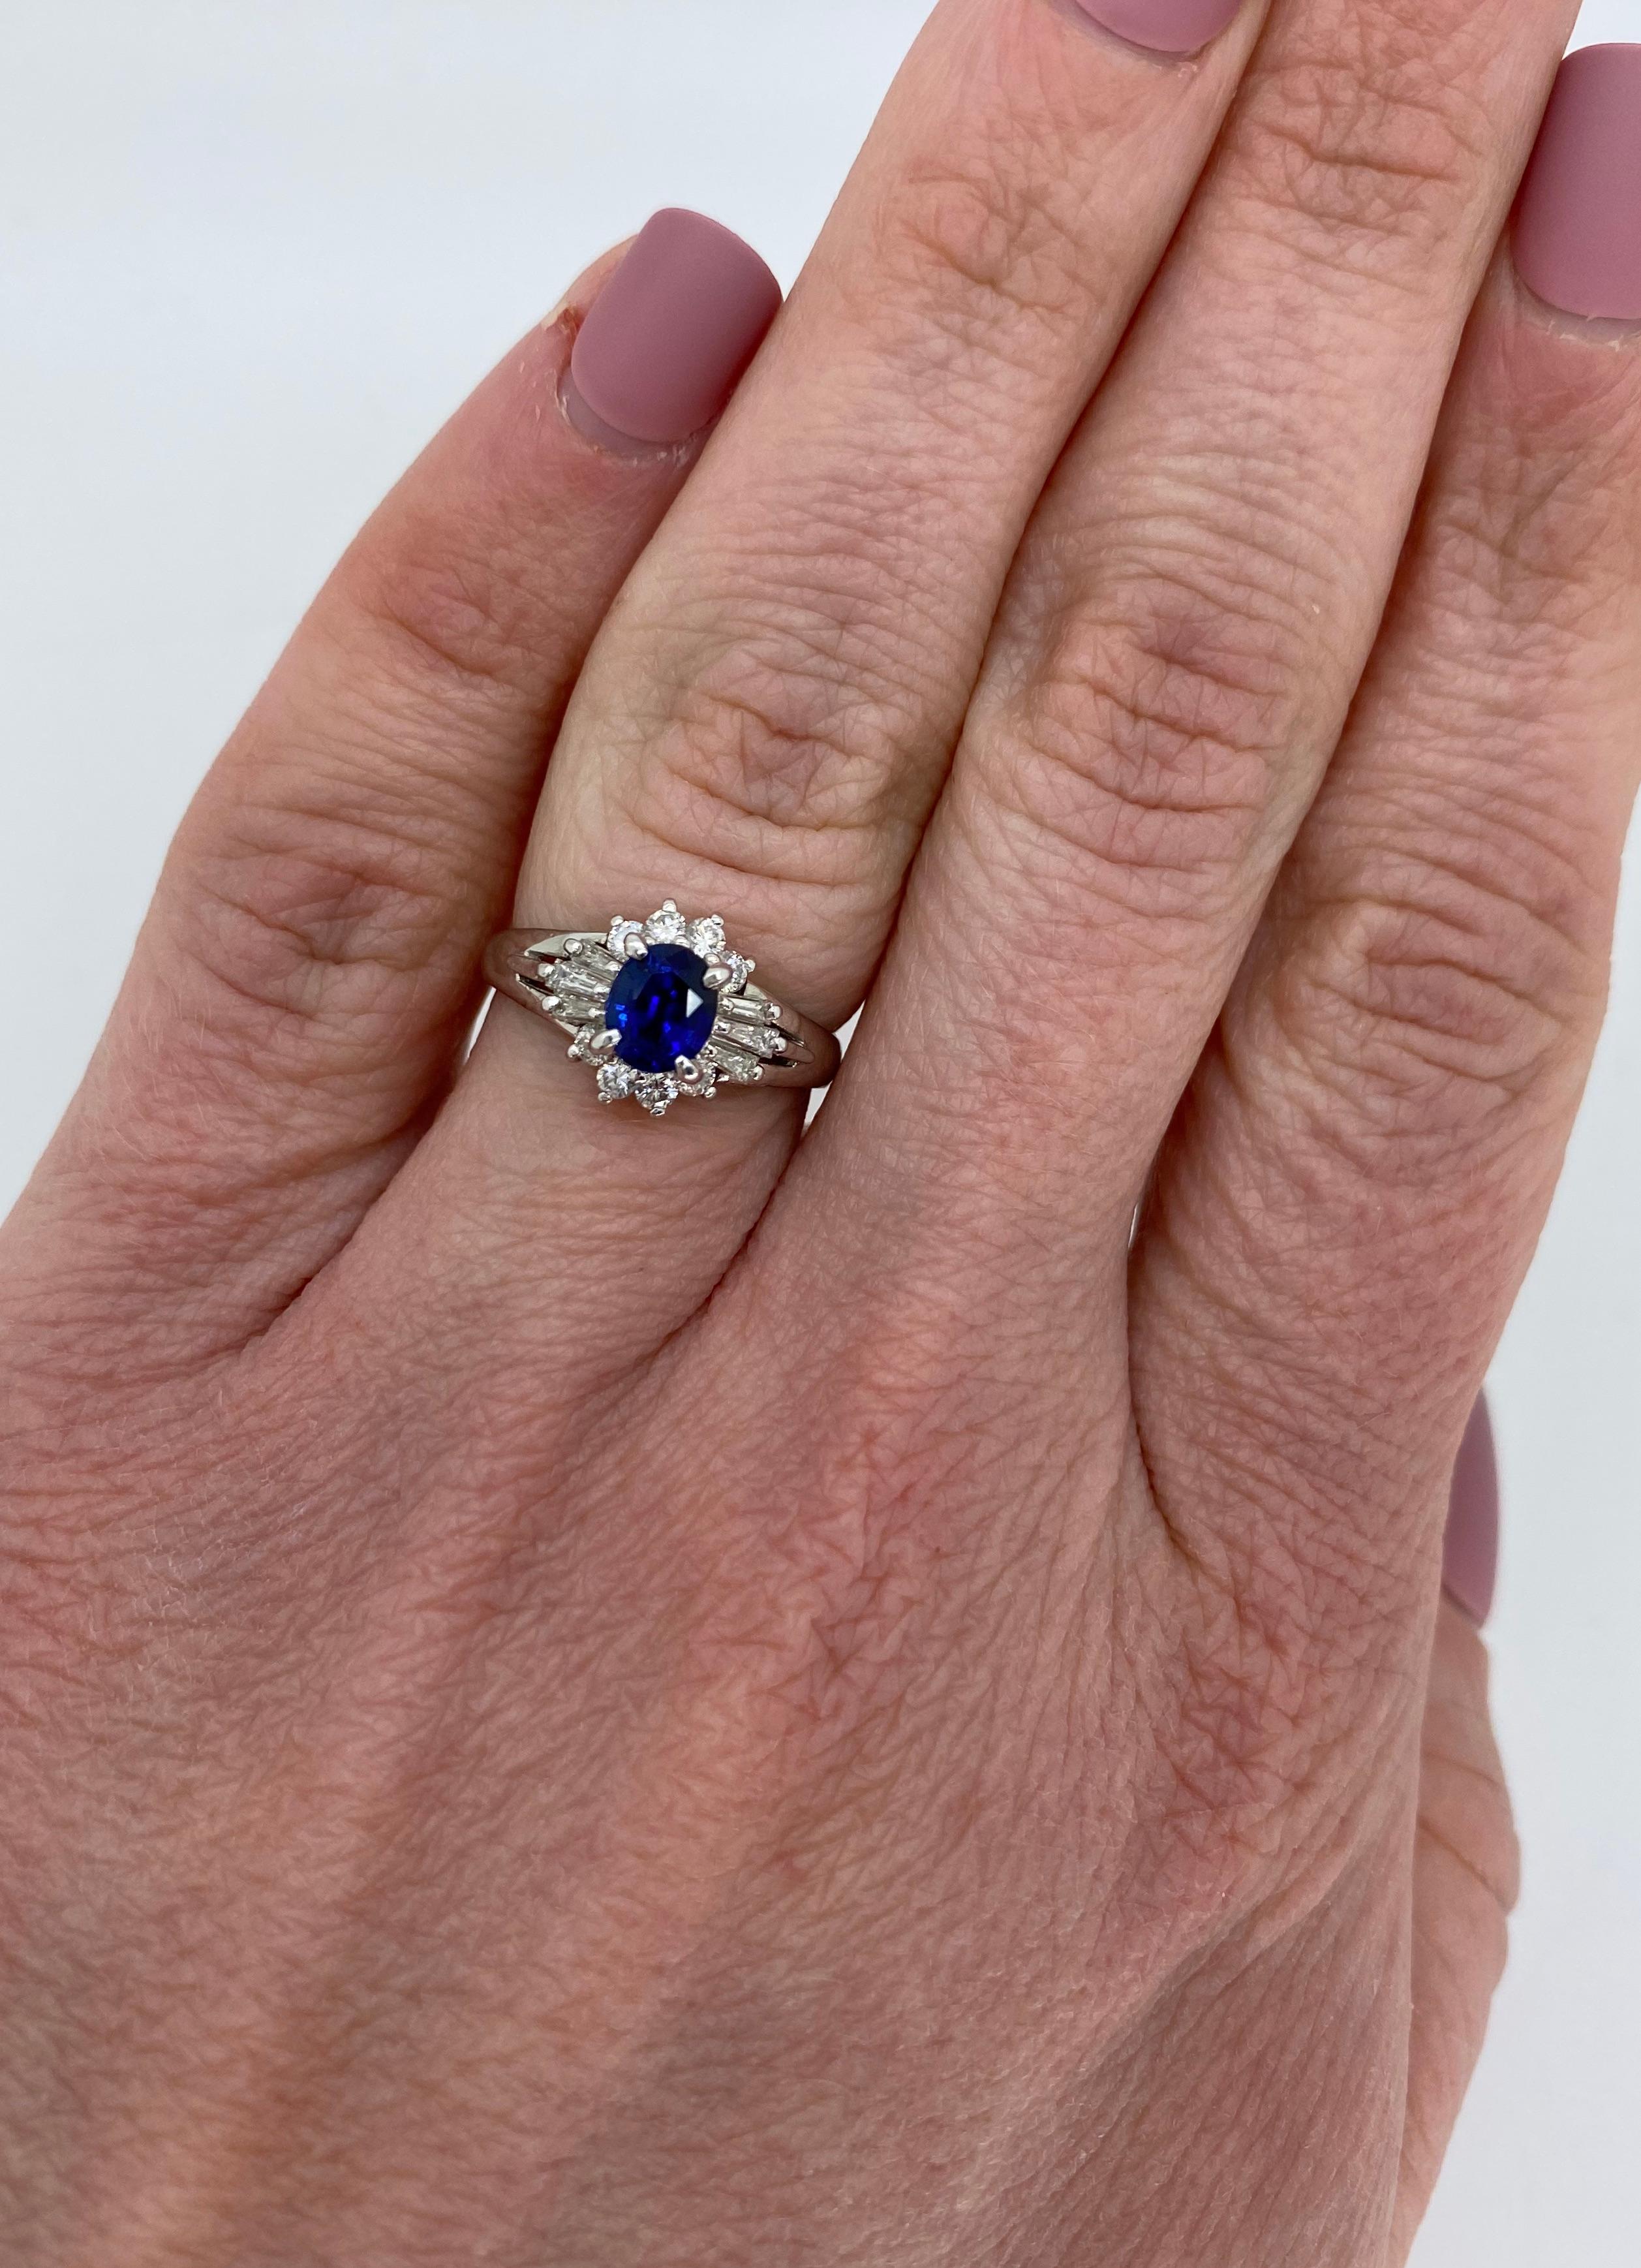 Sapphire and diamond ballerina style ring crafted in platinum.

Gemstone: Sapphire & Diamonds
Gemstone Carat Weight:  Approximately .77CT Blue Sapphire
Diamond Carat Weight:  Approximately .35CTW
Diamond Cut: Round Brilliant Cut and Tapered Baguette